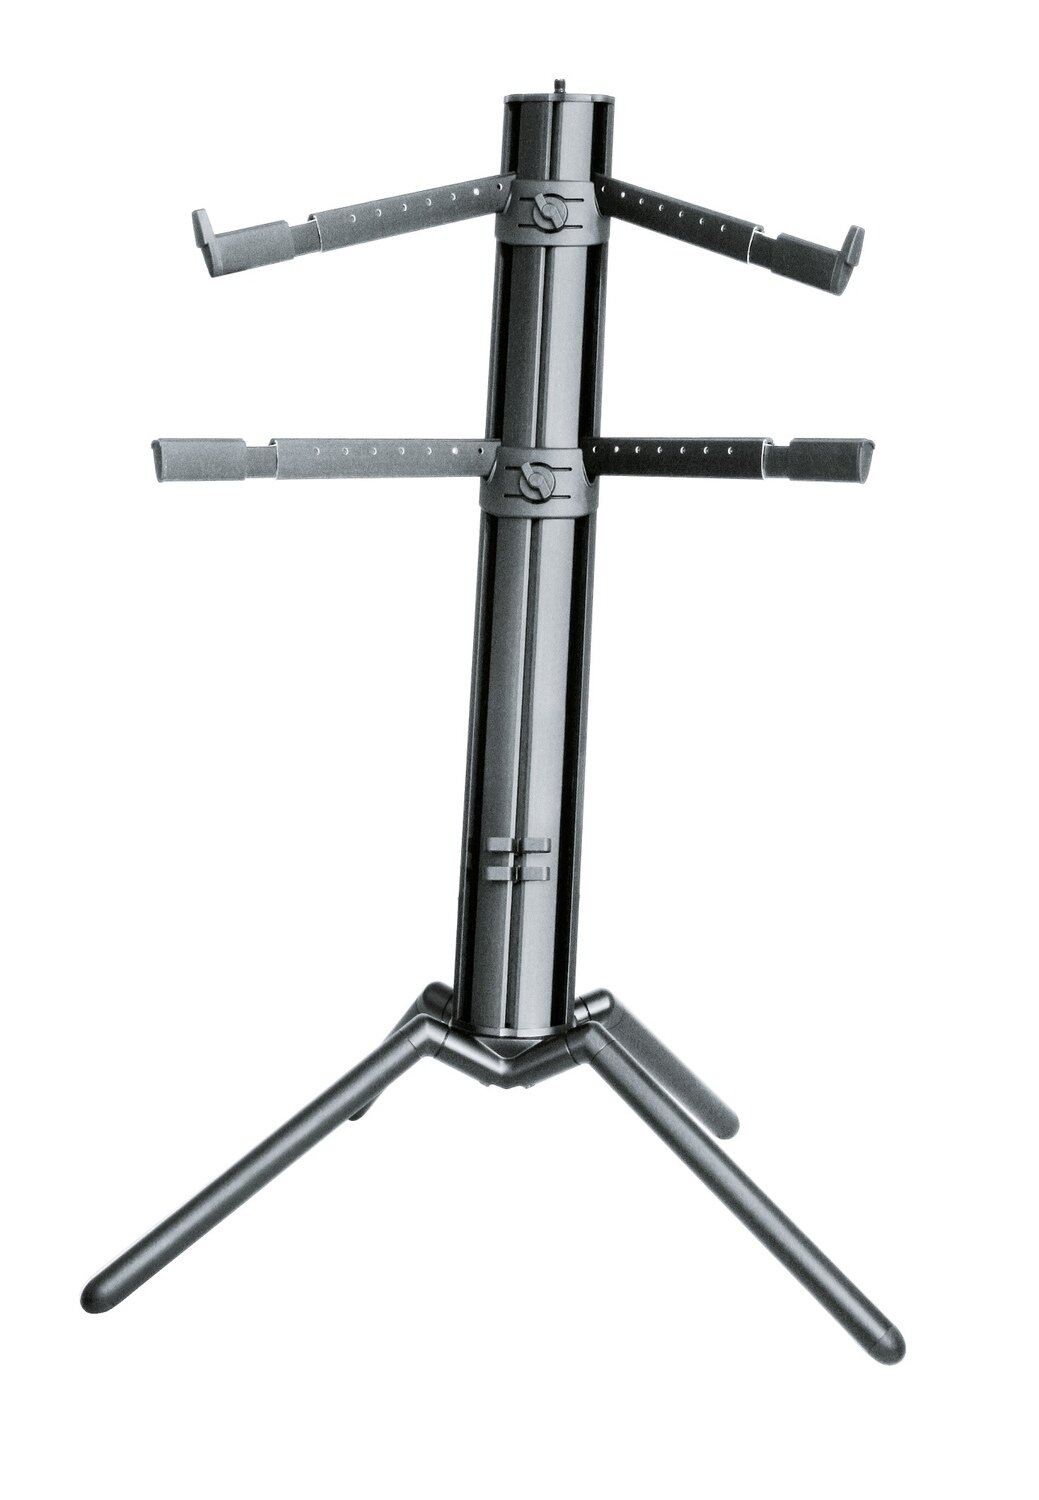 K&M 18860 Spider-Pro Double-Tier Keyboard Stand (Silver)
#KM18860A MFR #18860-000-30